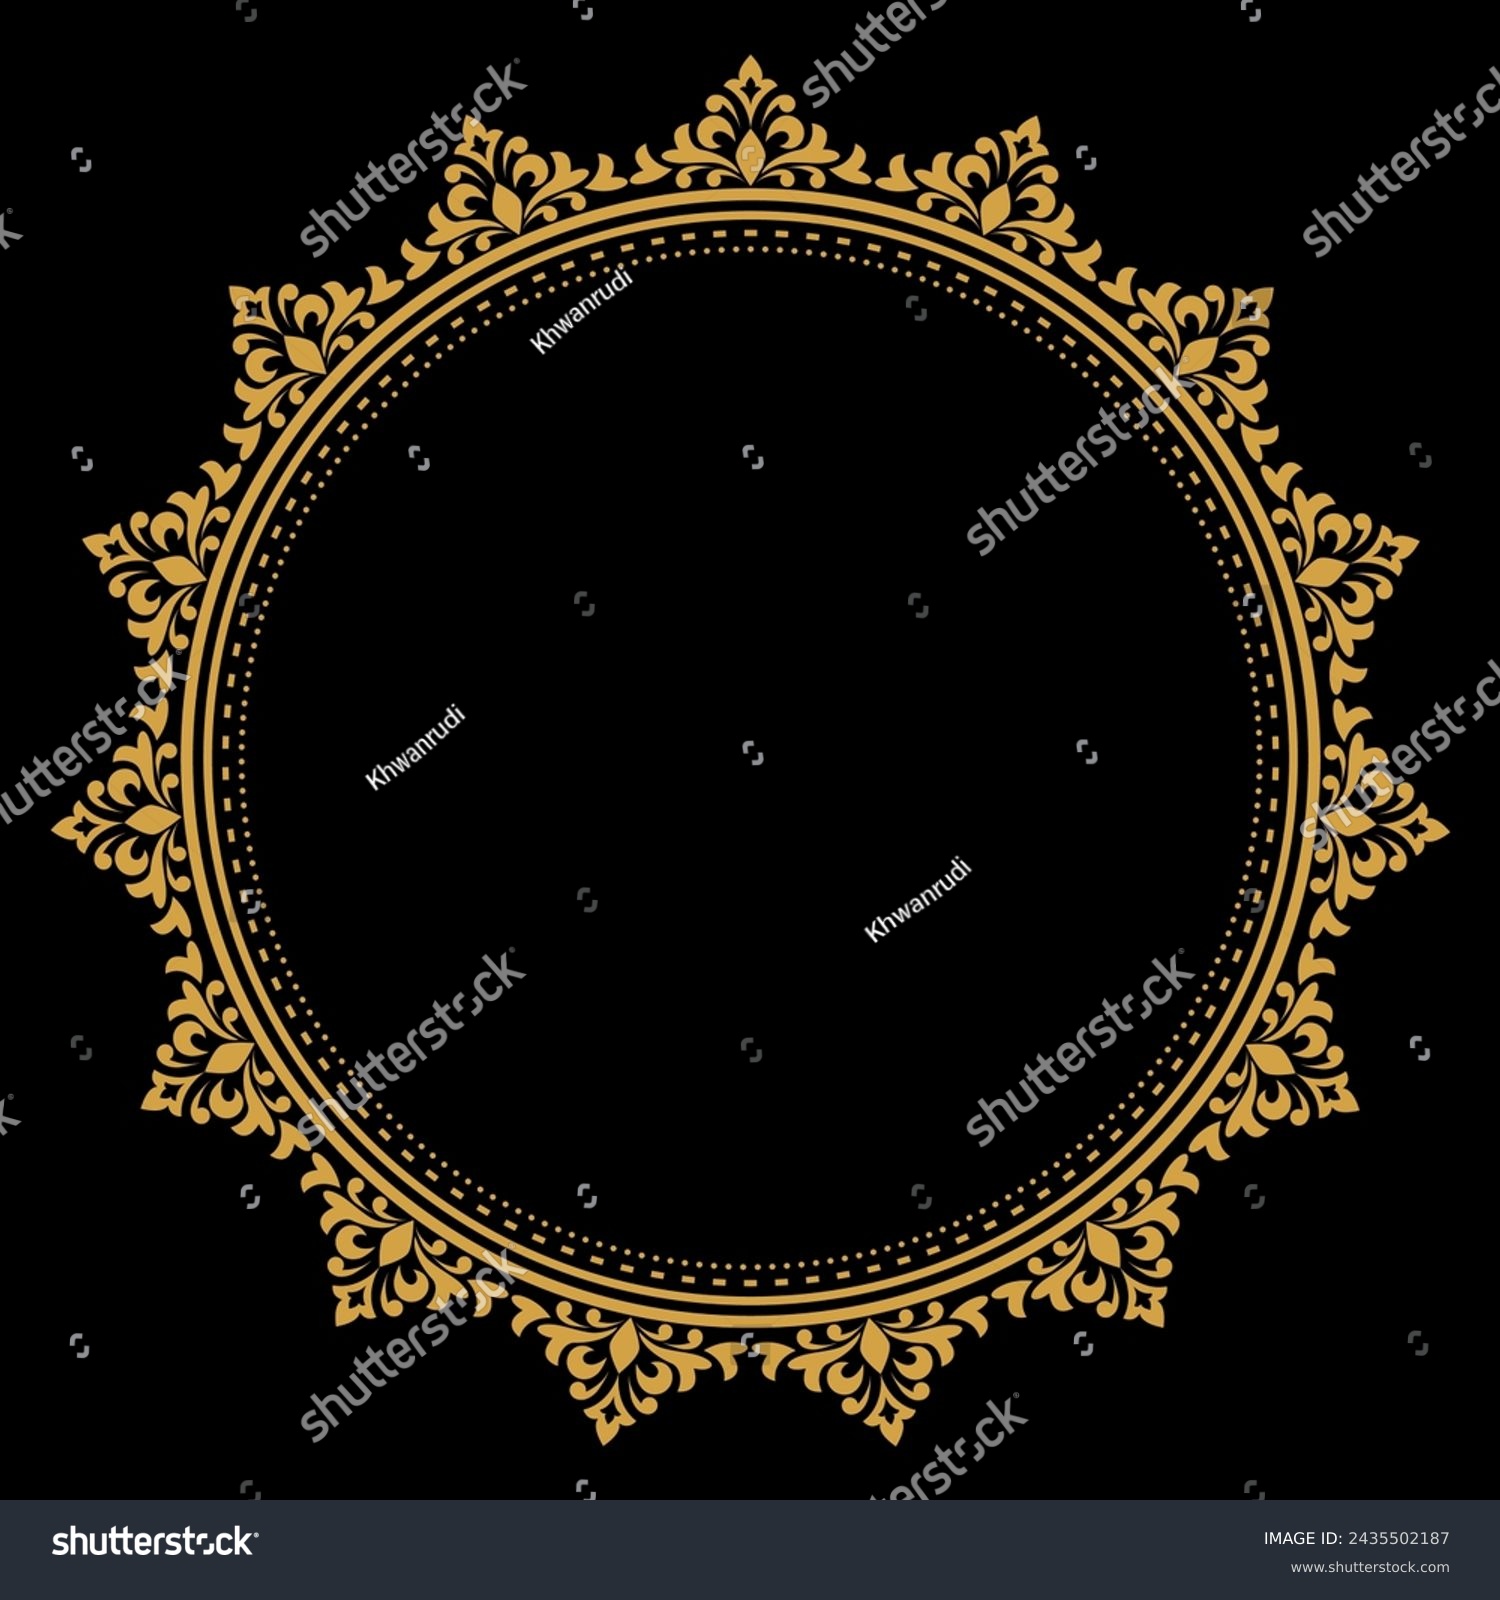 SVG of Luxury gold circle flourish frame with baroque style details, Vintage Golden Circular Round, perfect for wedding invitations and vintage card design, floral flower elements, Vector illustration svg